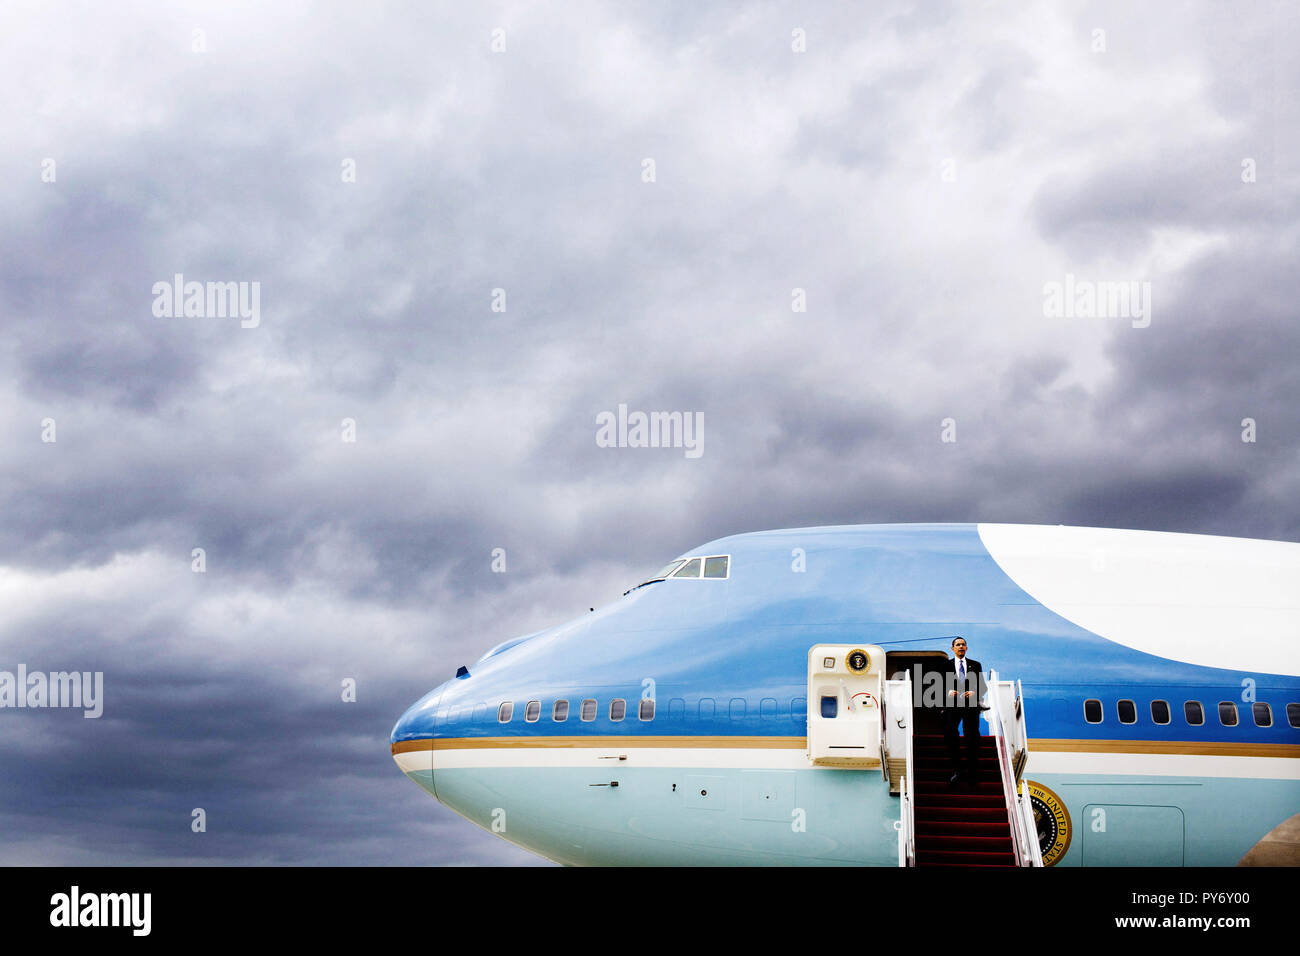 President Barack Obama leaves Air Force One at Andrews Air Force Base after a trip to New Mexico, May 14, 2009. (Official White House Photo by Pete Souza)  This official White House photograph is being made available for publication by news organizations and/or for personal use printing by the subject(s) of the photograph. The photograph may not be manipulated in any way or used in materials, advertisements, products, or promotions that in any way suggest approval or endorsement of the President, the First Family, or the White House. Stock Photo